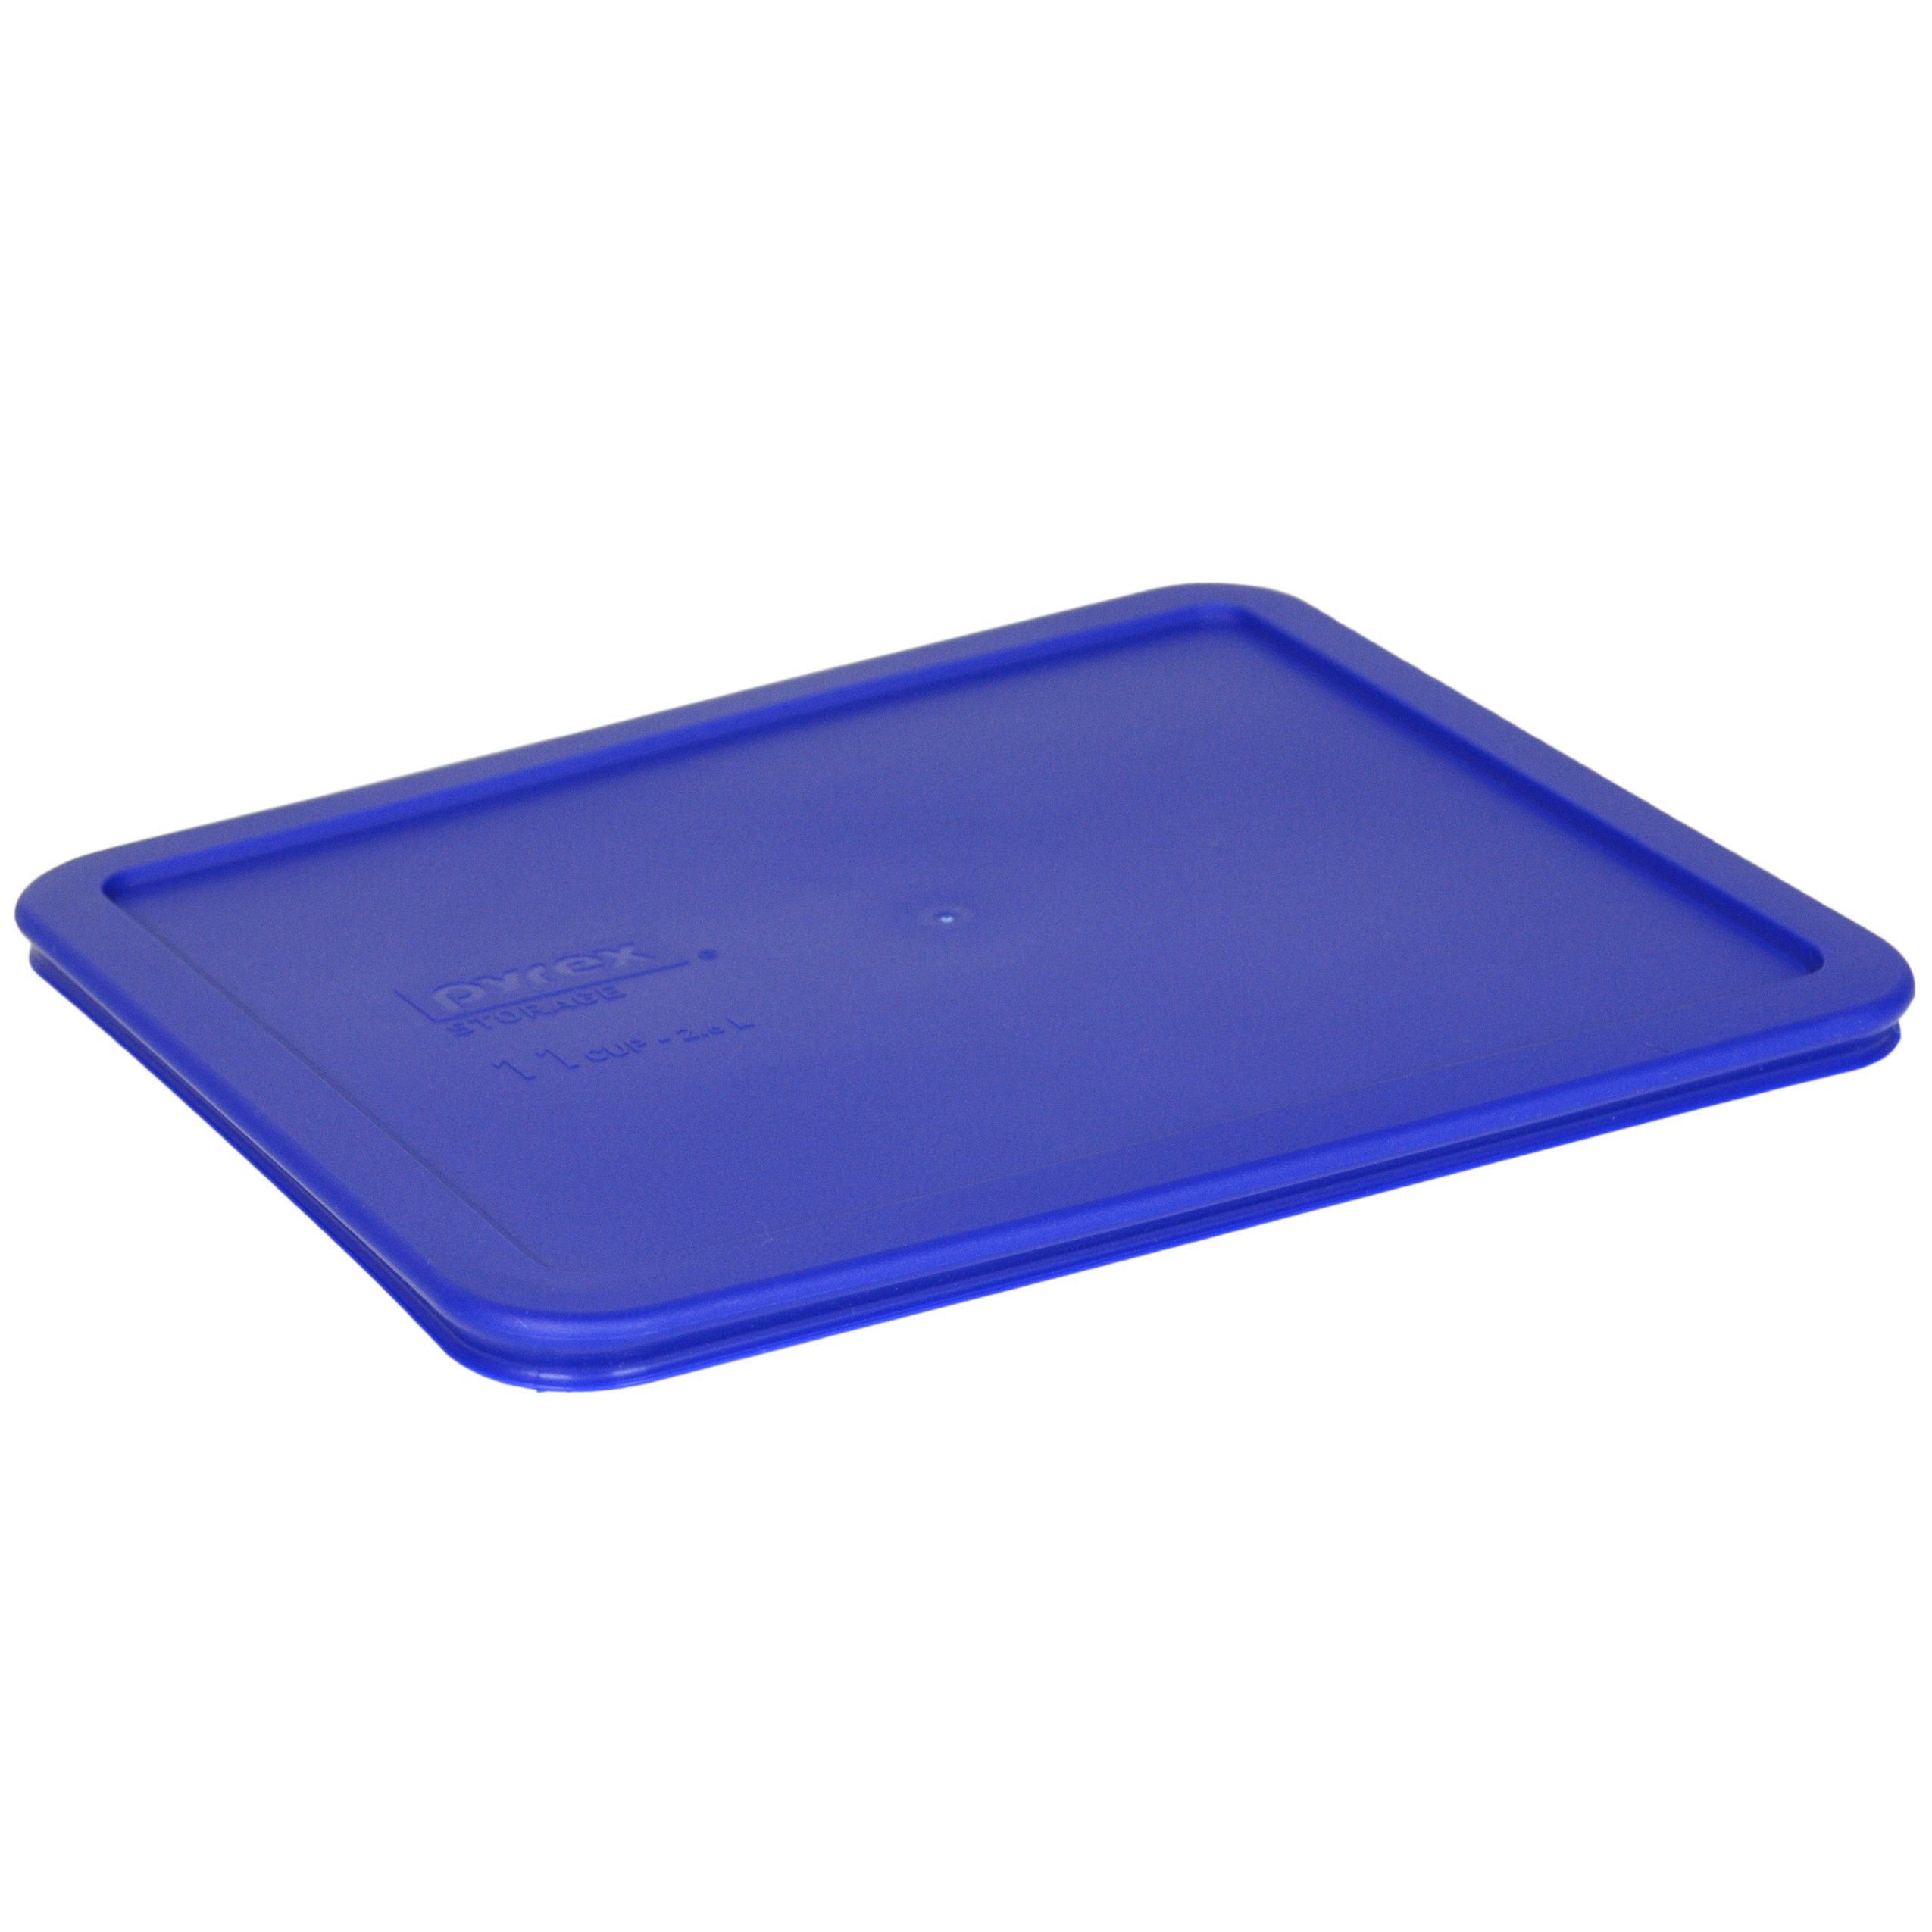 Pyrex 7212-PC 11 Cup (1) Blue, (1) Cadet Blue and (1) Marine Blue Rectangle Plastic Food Storage Lid, Made in USA